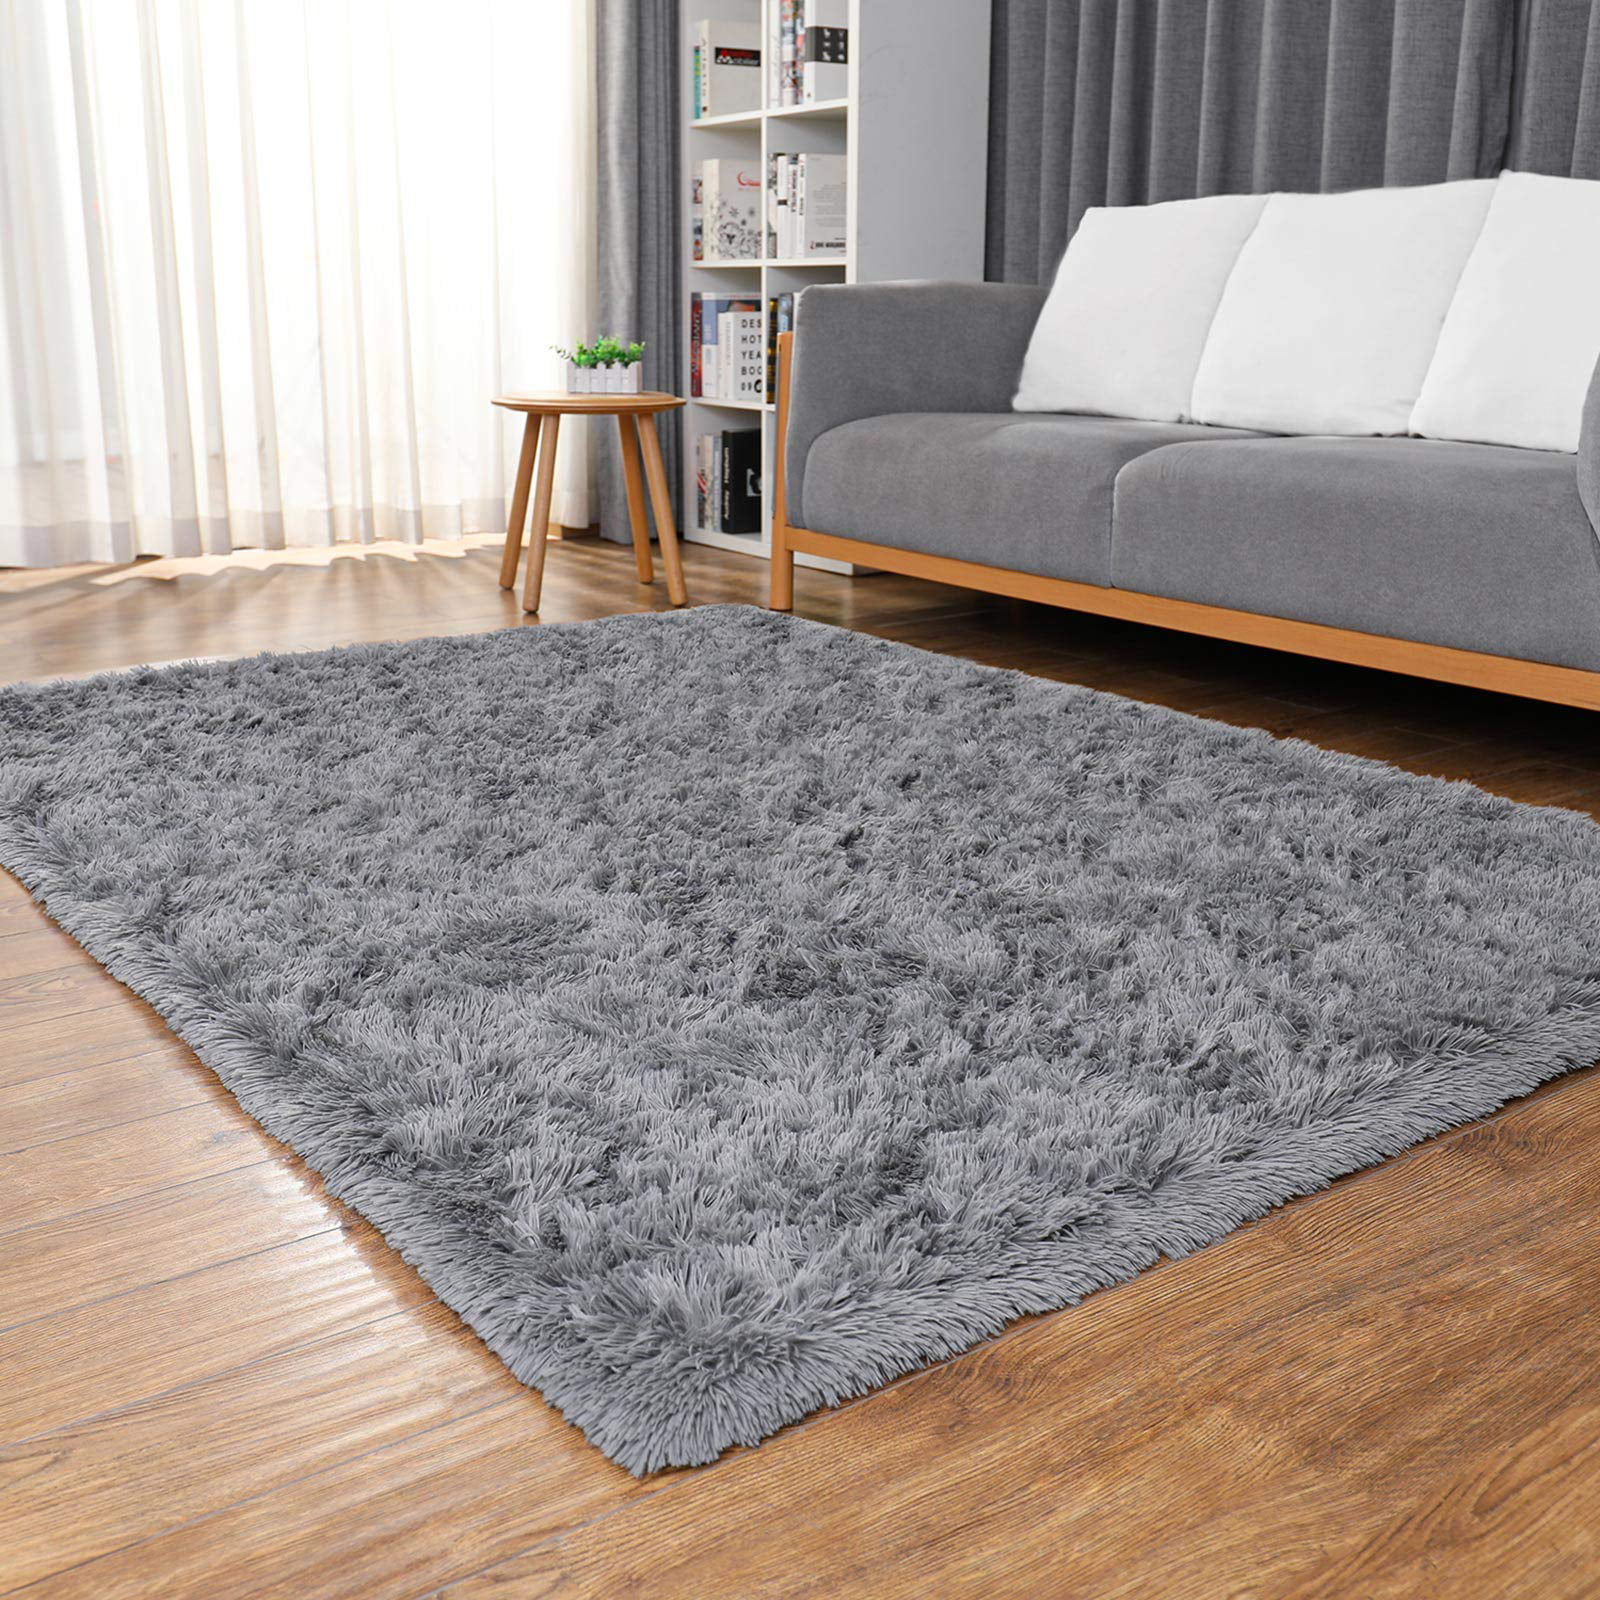 Carvapet Super Soft Shaggy Area Rugs for Bedroom Living Room Modern Fluffy Carpet for Nursery Baby Rooms Kids Rooms Silky Smooth Mat 2.3 x 5 Khaki 